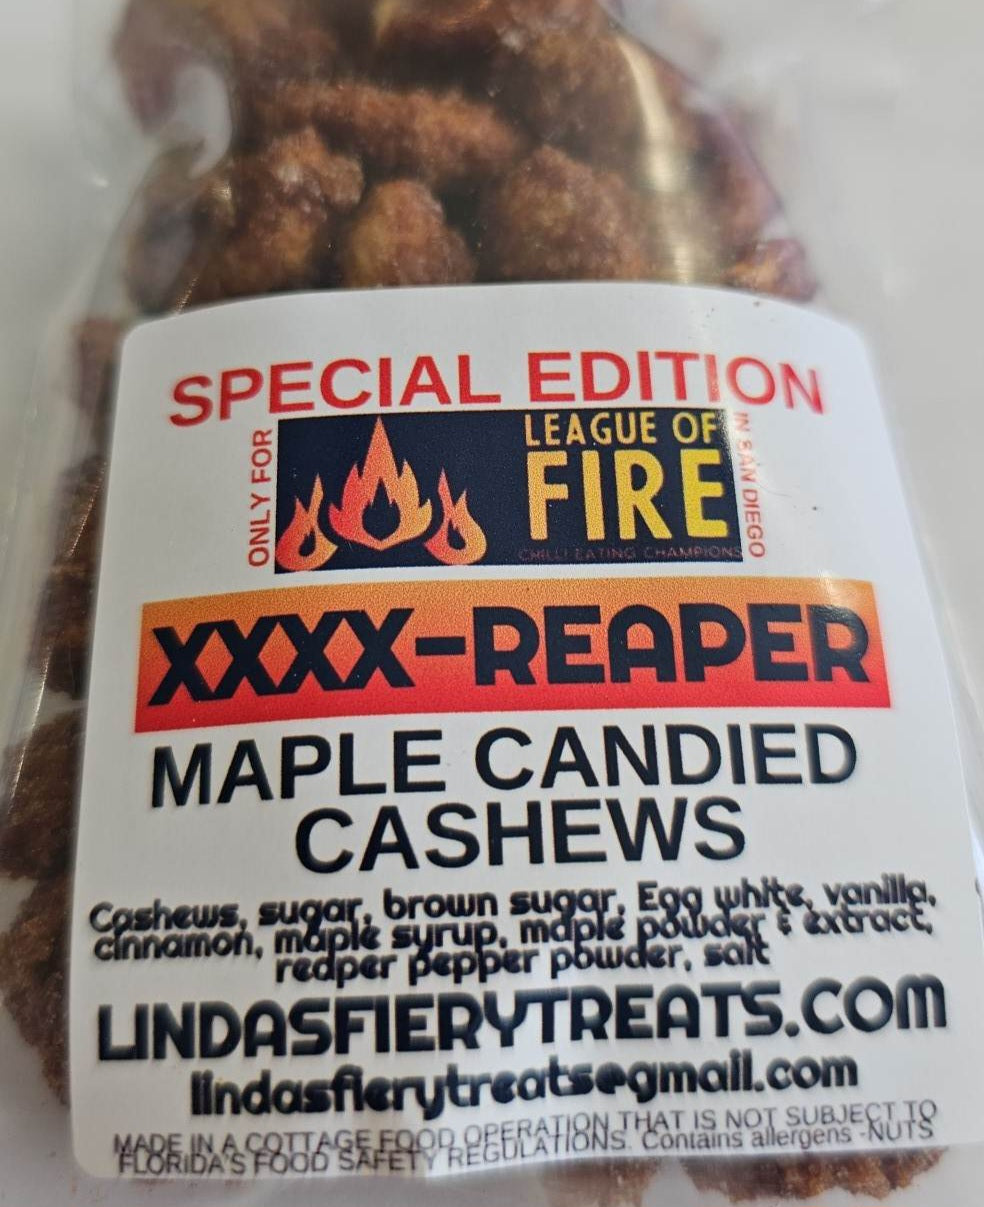 Special edition reaper cashews!